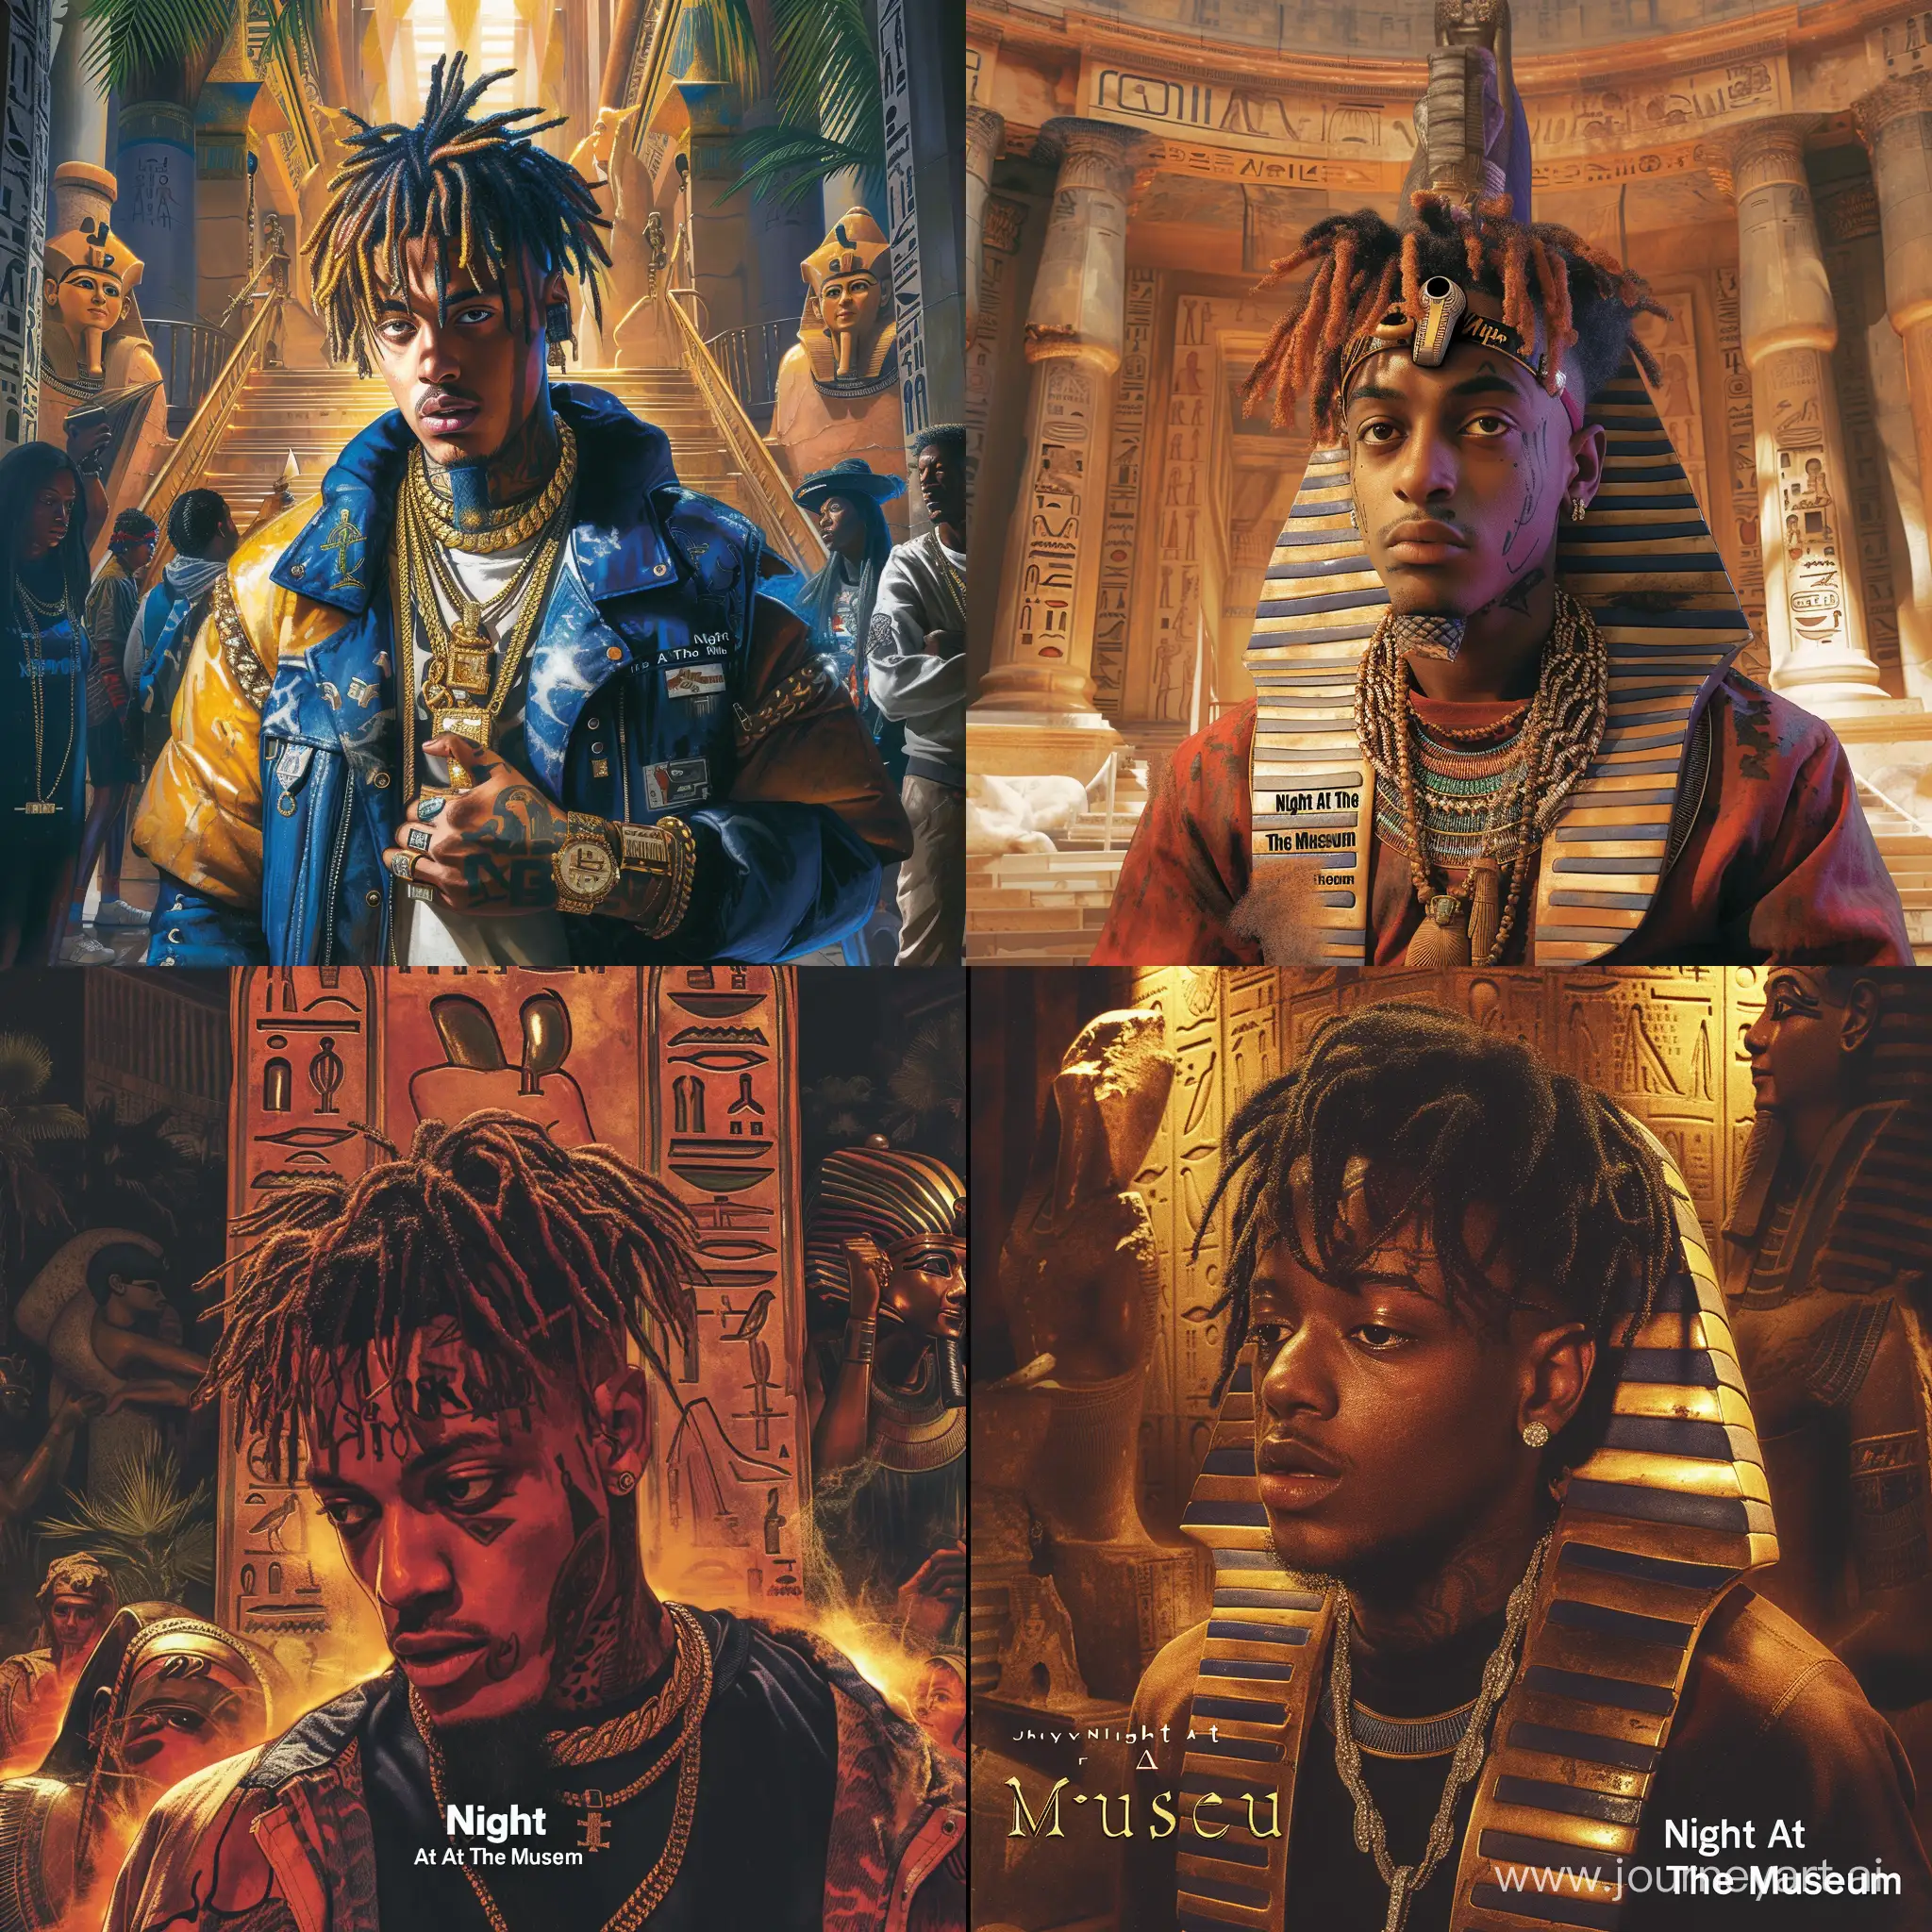 A Album Cover of Juice WRLD,In the Movie “Night At The Museum”.While Running from Ancient Egypt Pharaohs